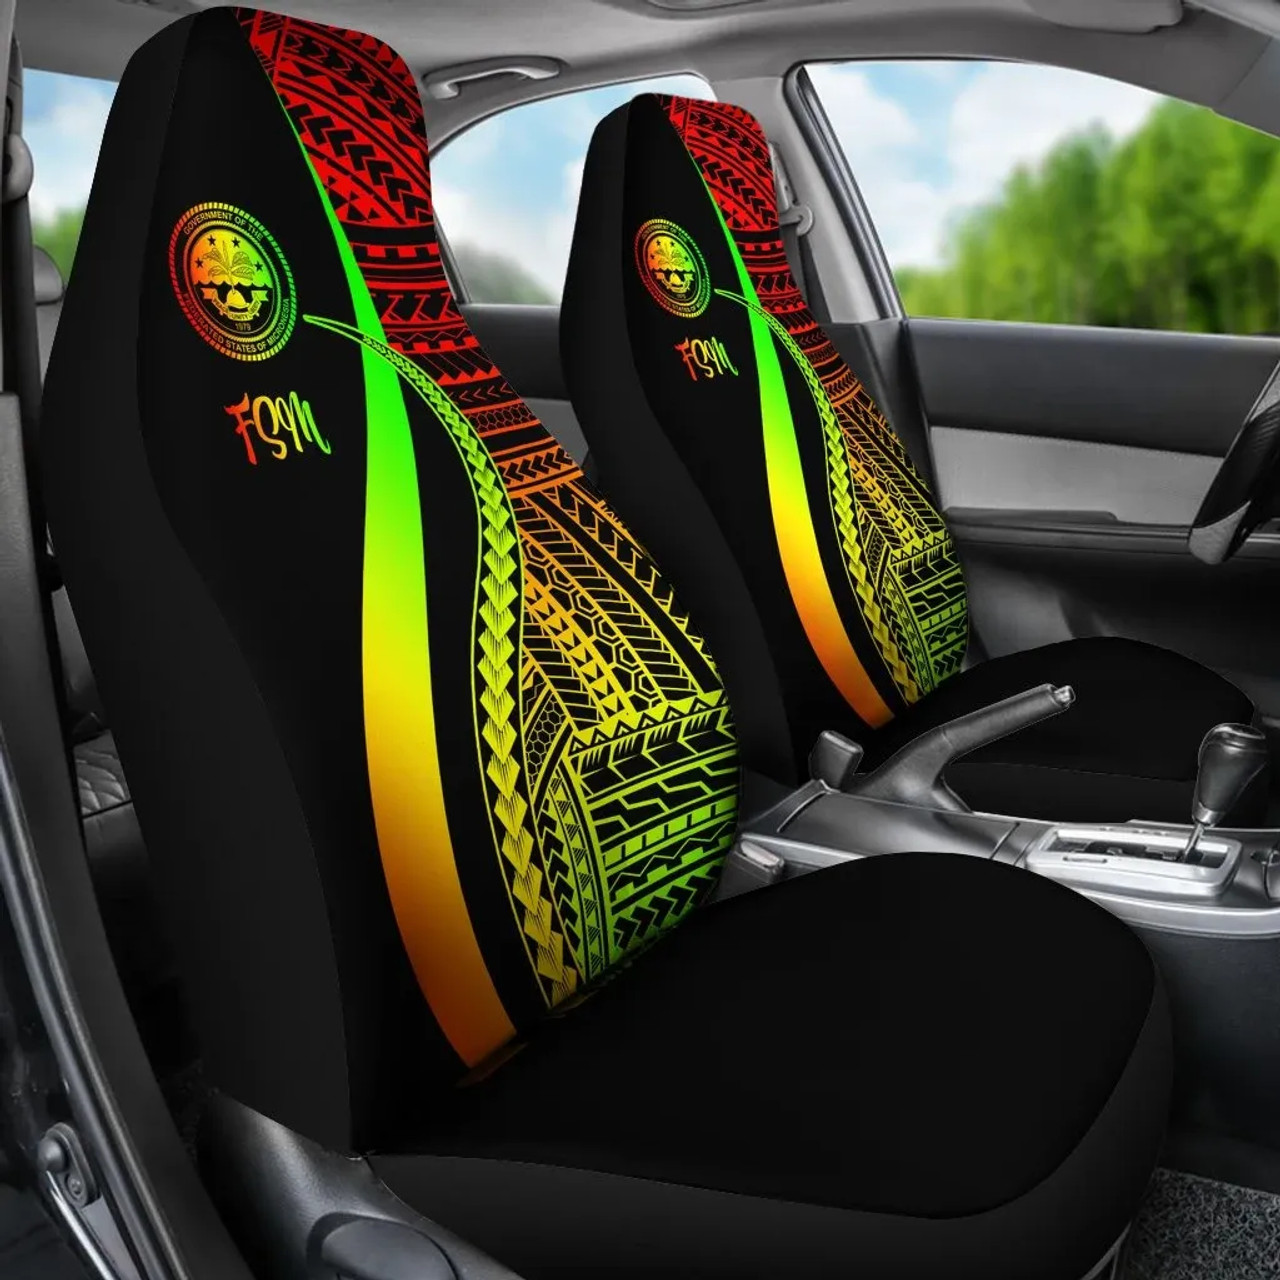 Federated States of Micronesia Car Seat Covers - Reggae Polynesian Tentacle Tribal Pattern